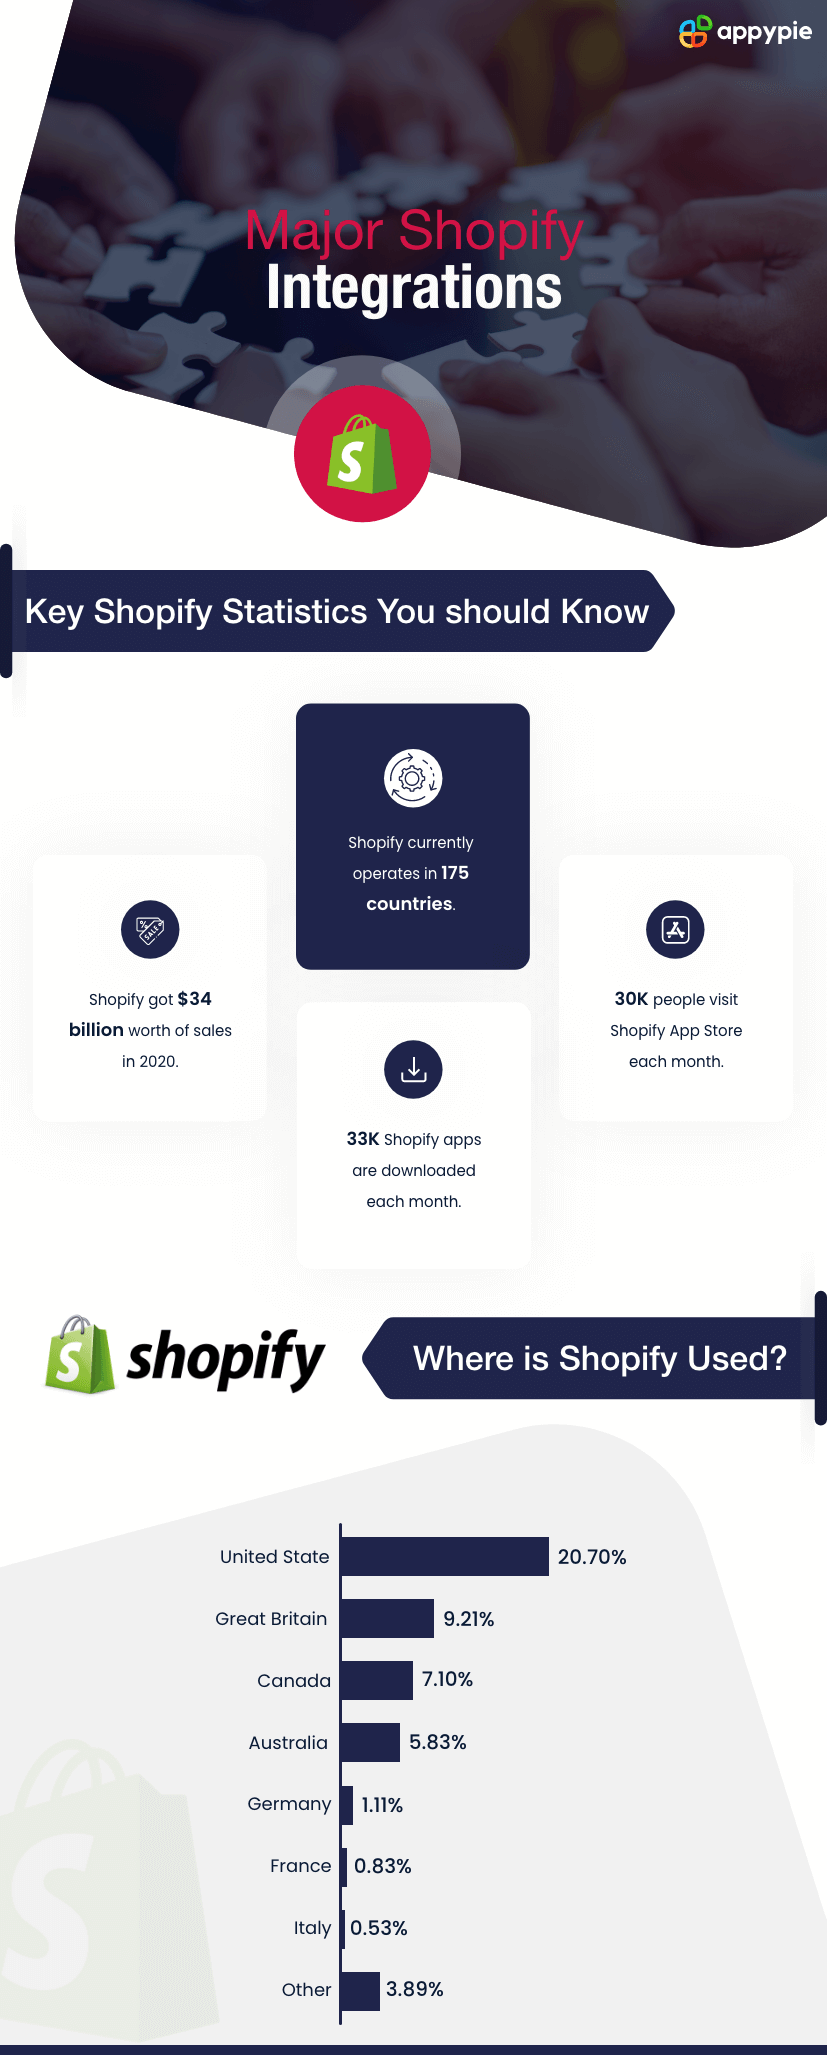 Major Shopify Integrations That You Should Know